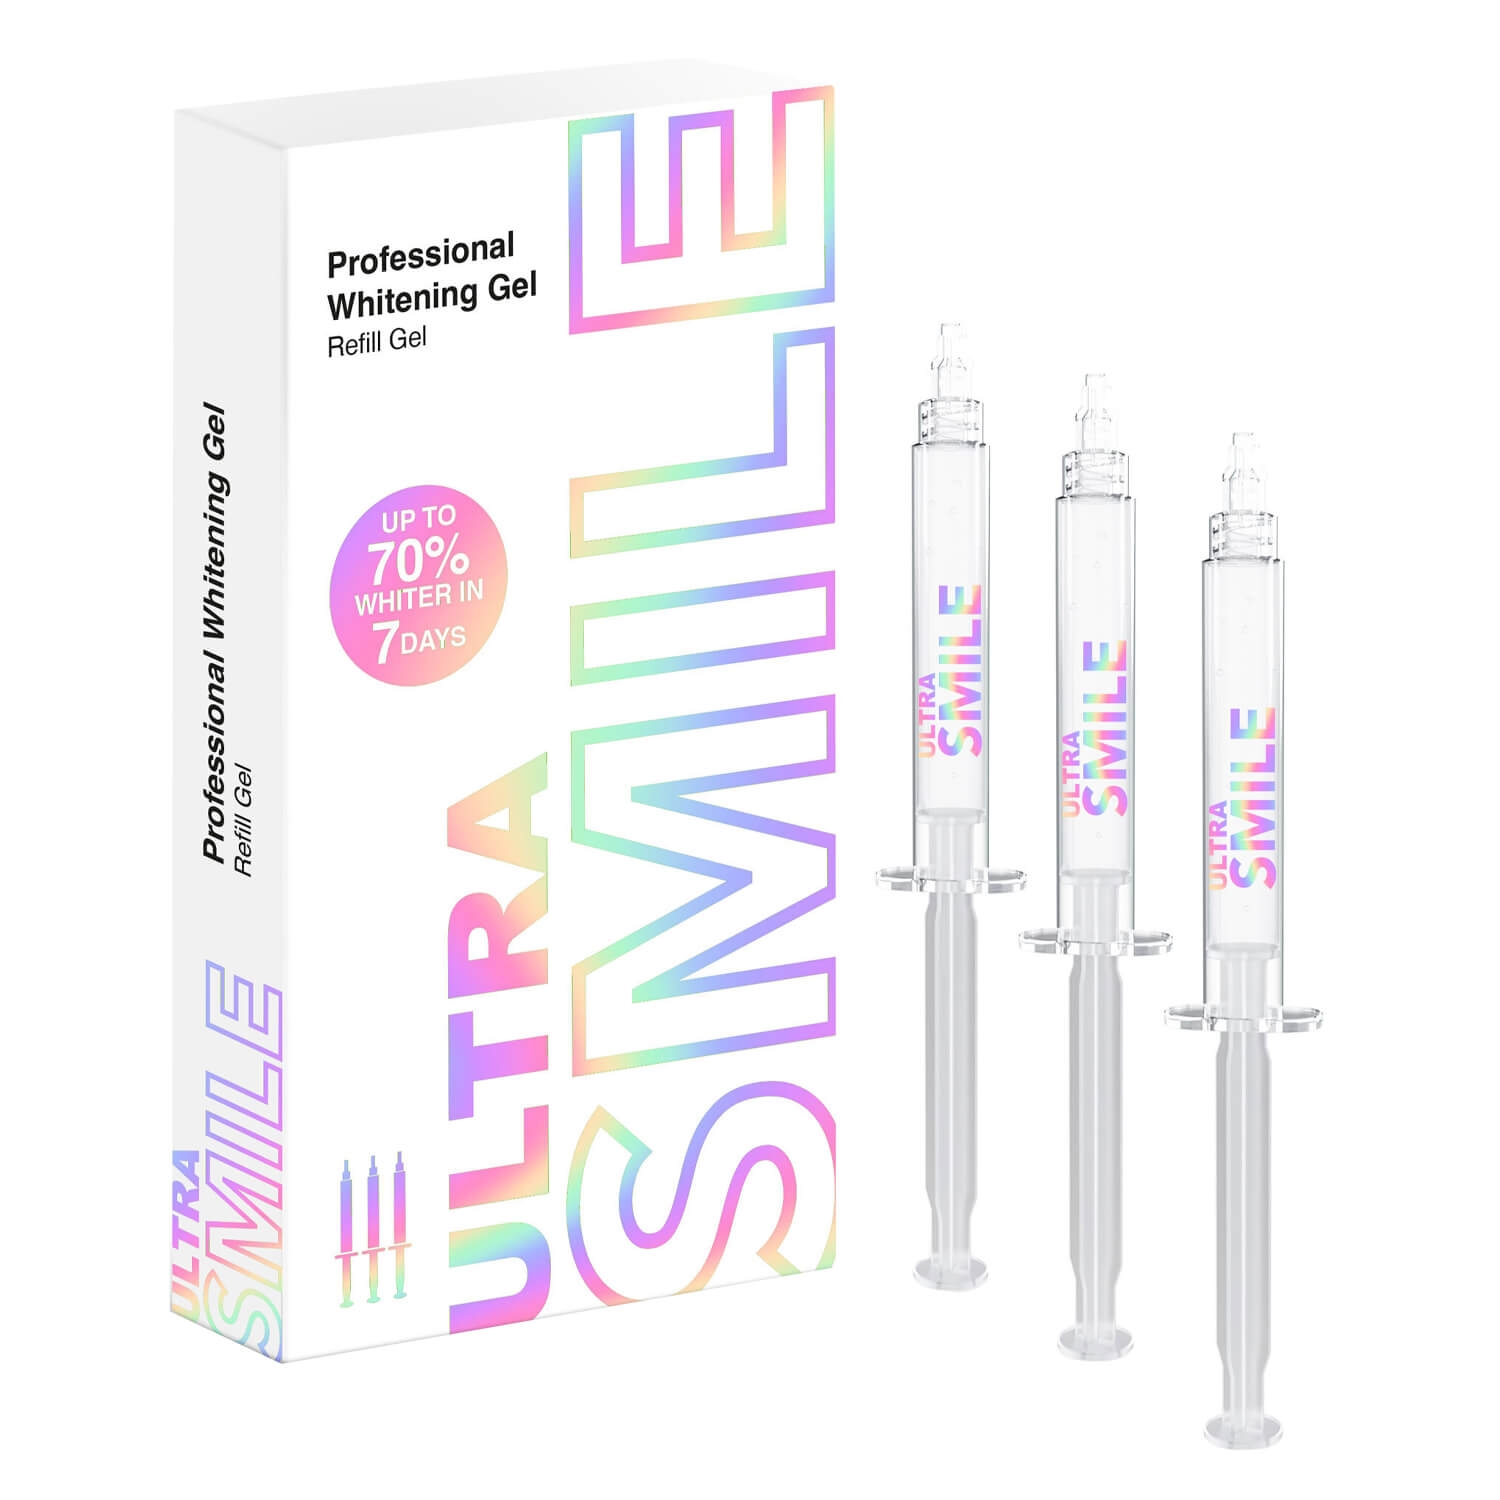 Product image from UltraSmile - Professional Whitening Gel Refill Kit